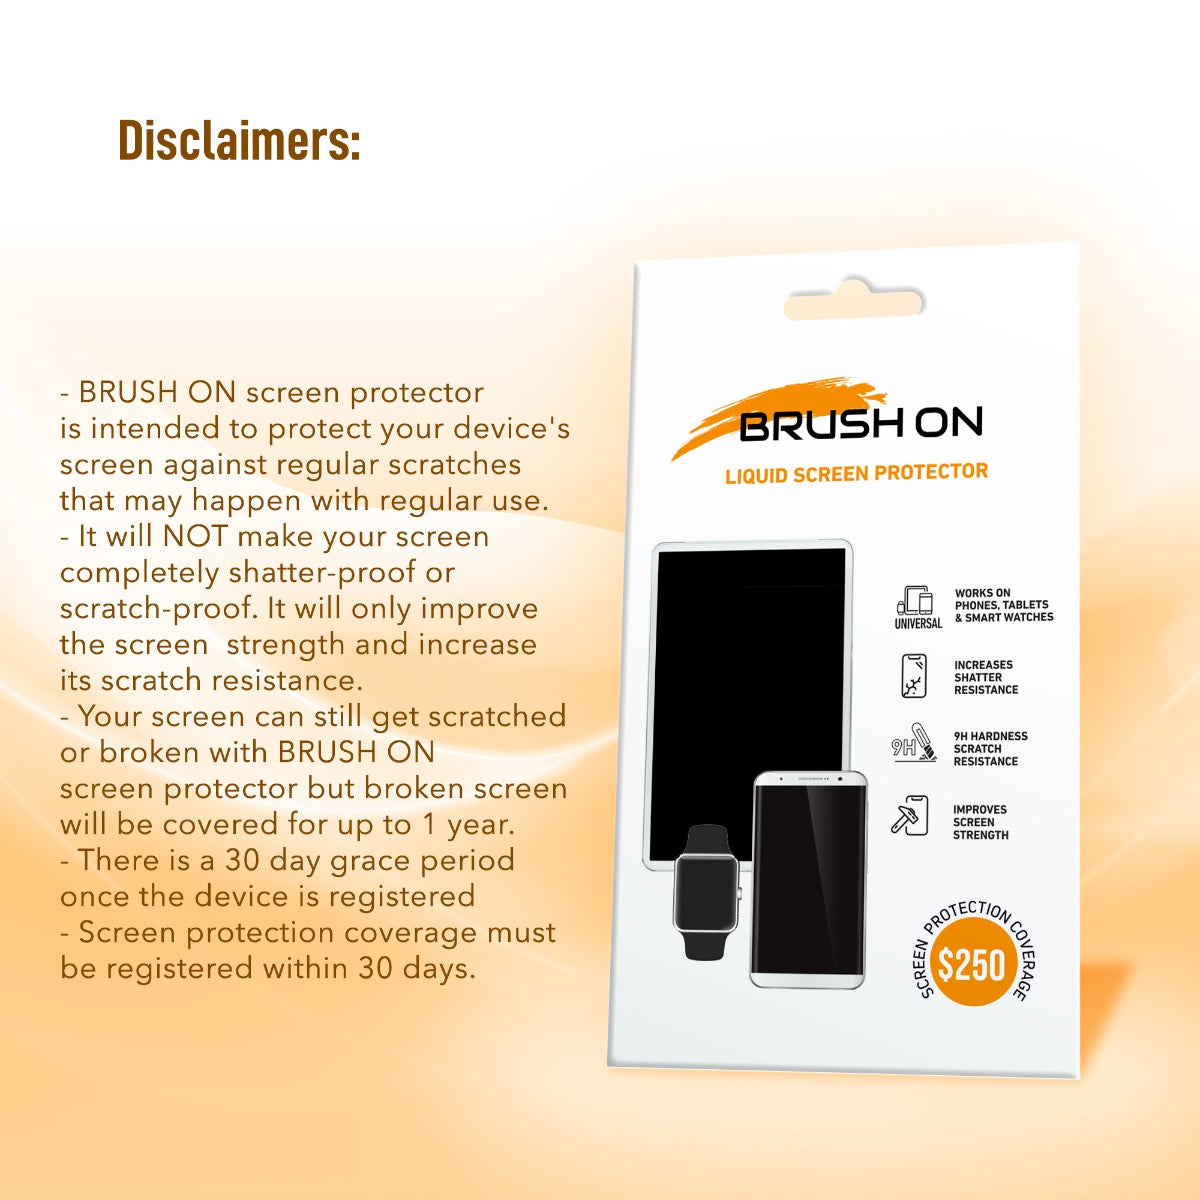 BRUSH ON Liquid Glass Screen Protector with $250 Coverage for All Devices